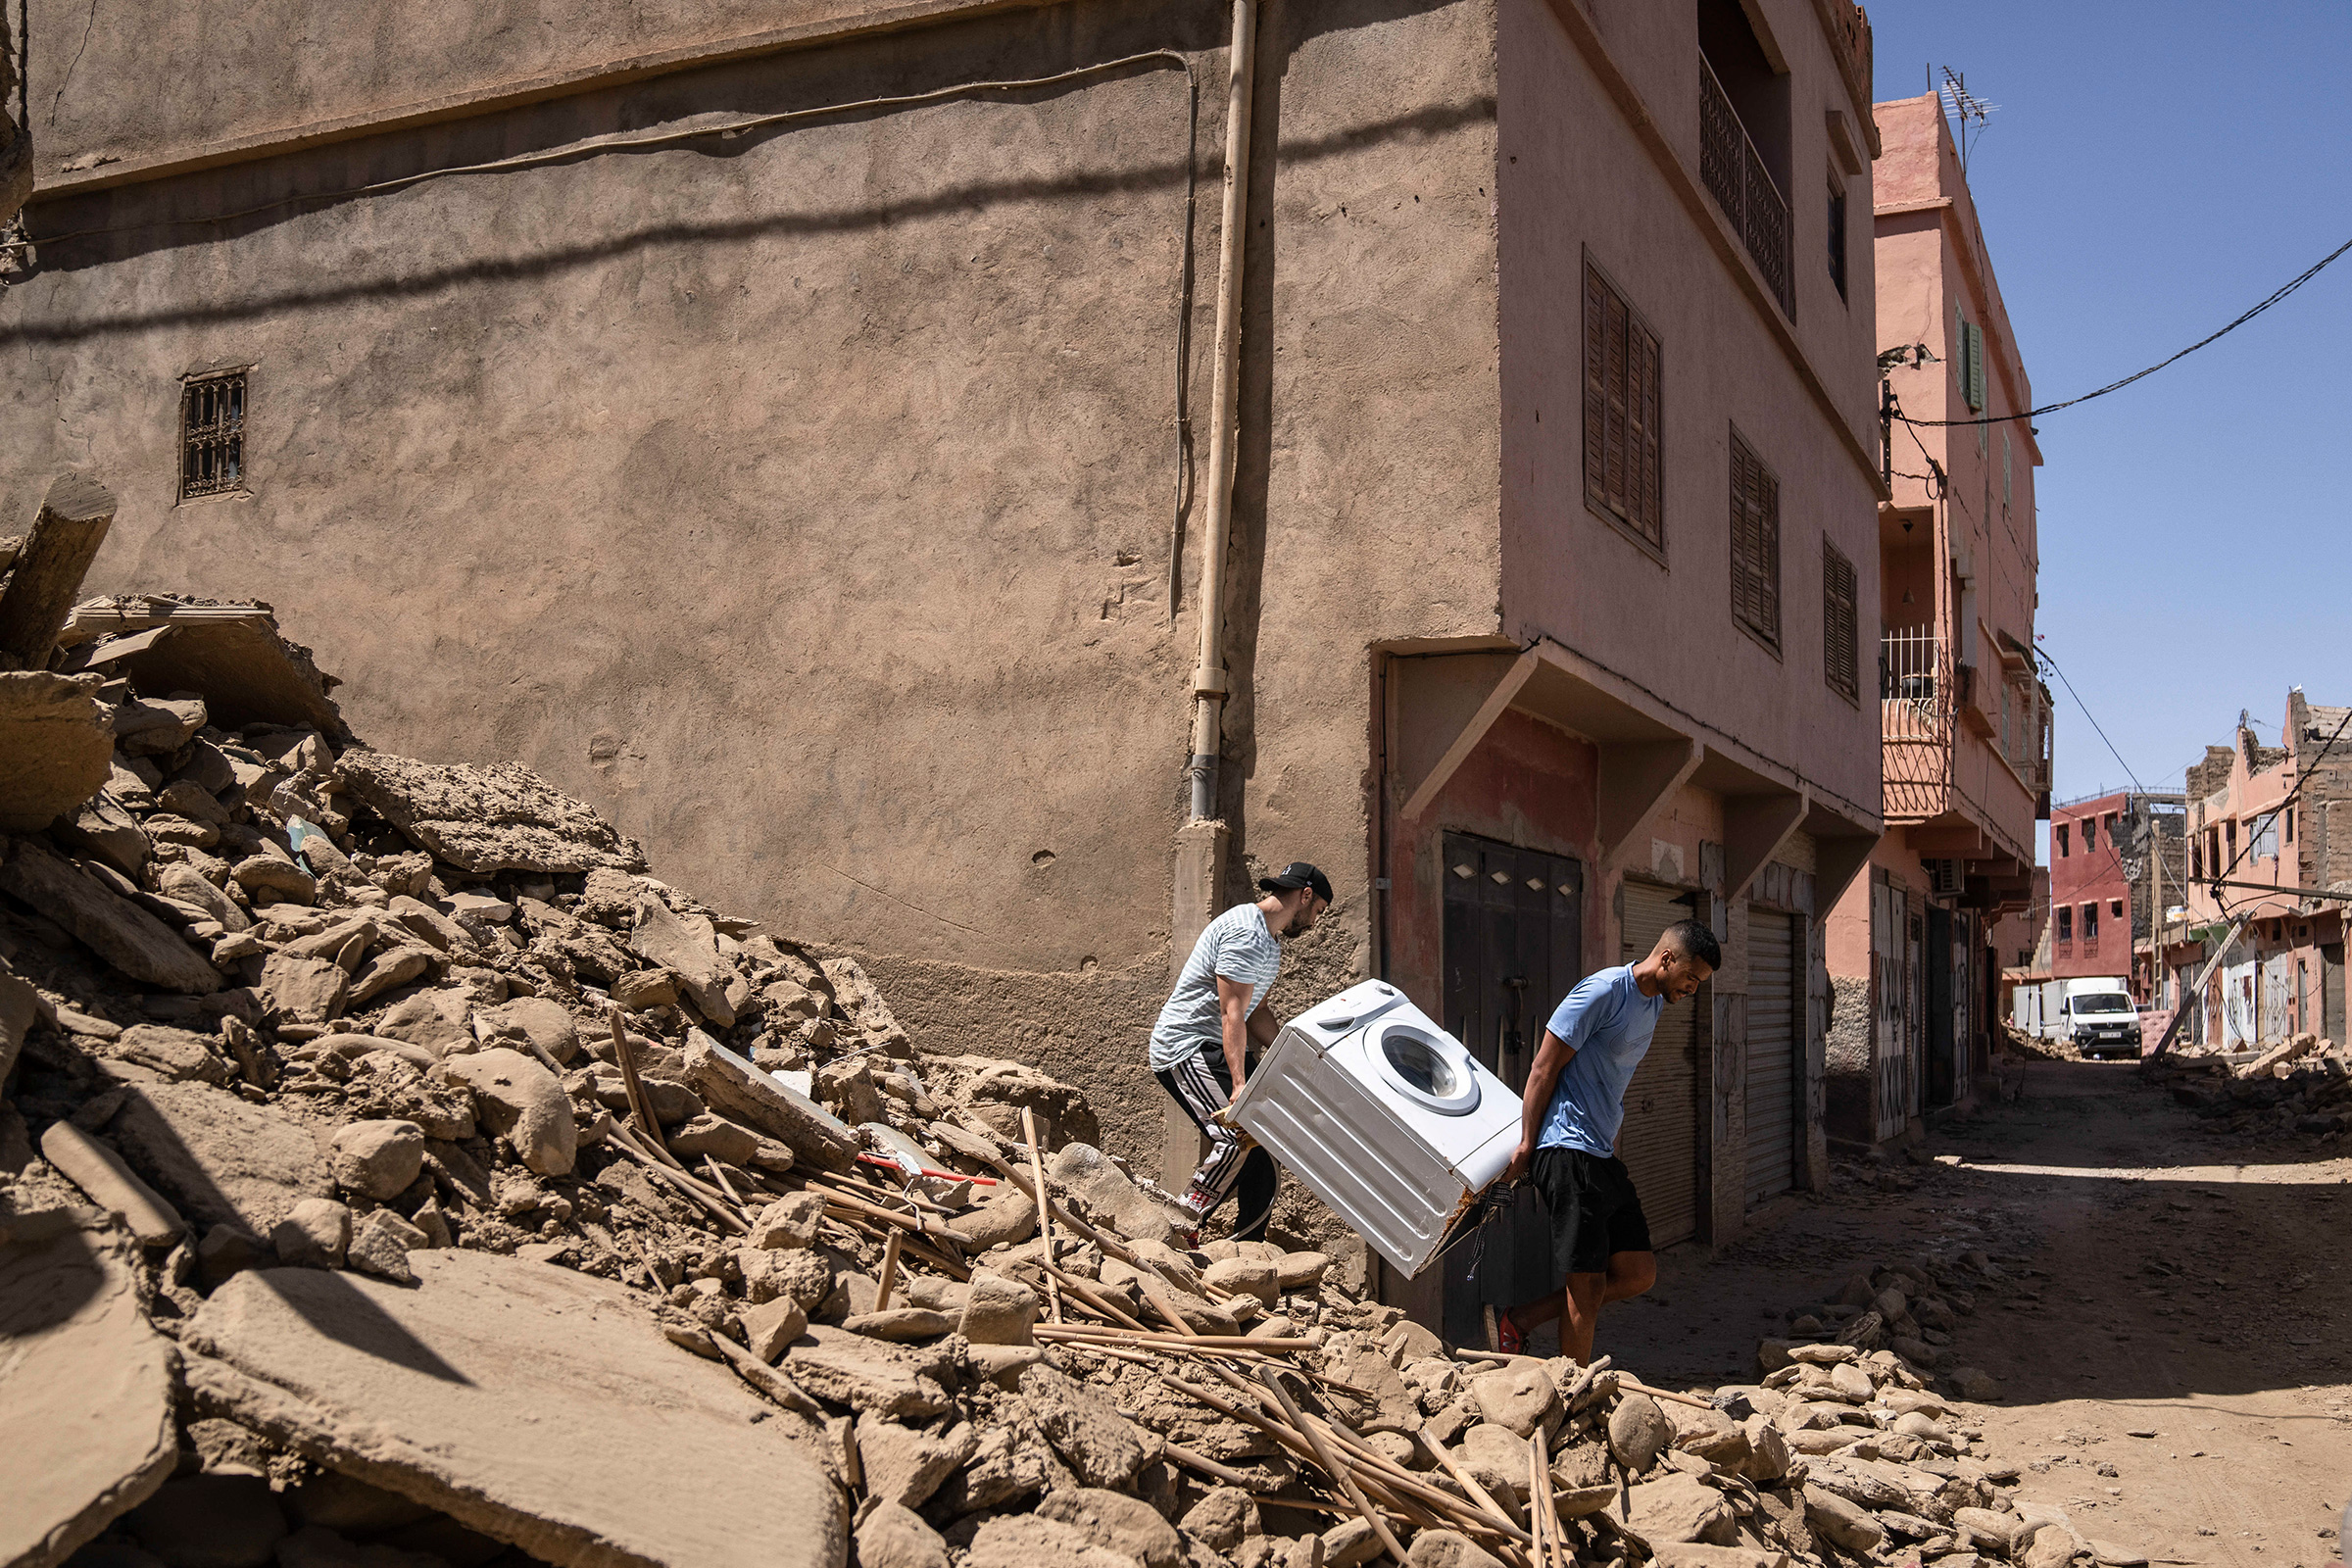 People recover a washing machine from their home that was damaged by the earthquake, in the town of Amizmiz, near Marrakech, Morocco, on Sept. 10. An aftershock rattled Moroccans on Sunday as they prayed for victims of the nation’s strongest earthquake in more than a century and toiled to rescue survivors while soldiers and workers brought water and supplies to desperate mountain villages in ruins.  (Mosa'ab Elshamy—AP)